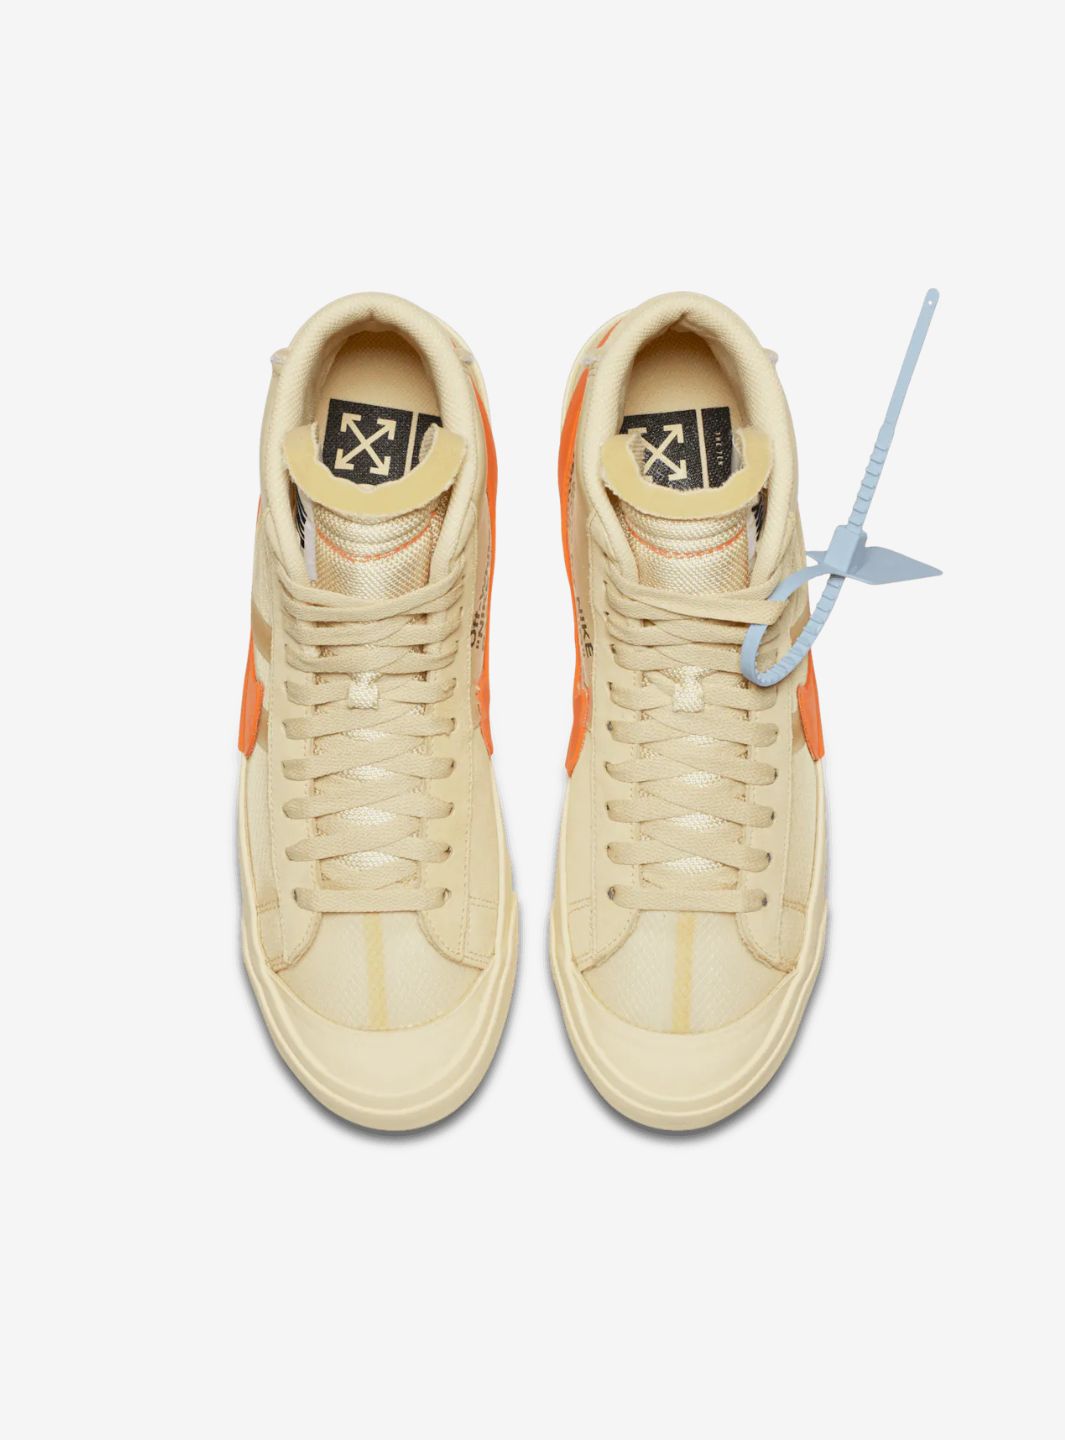 Nike Blazer Mid Off-White All Hallow's Eve - AA3832-700 | ResellZone